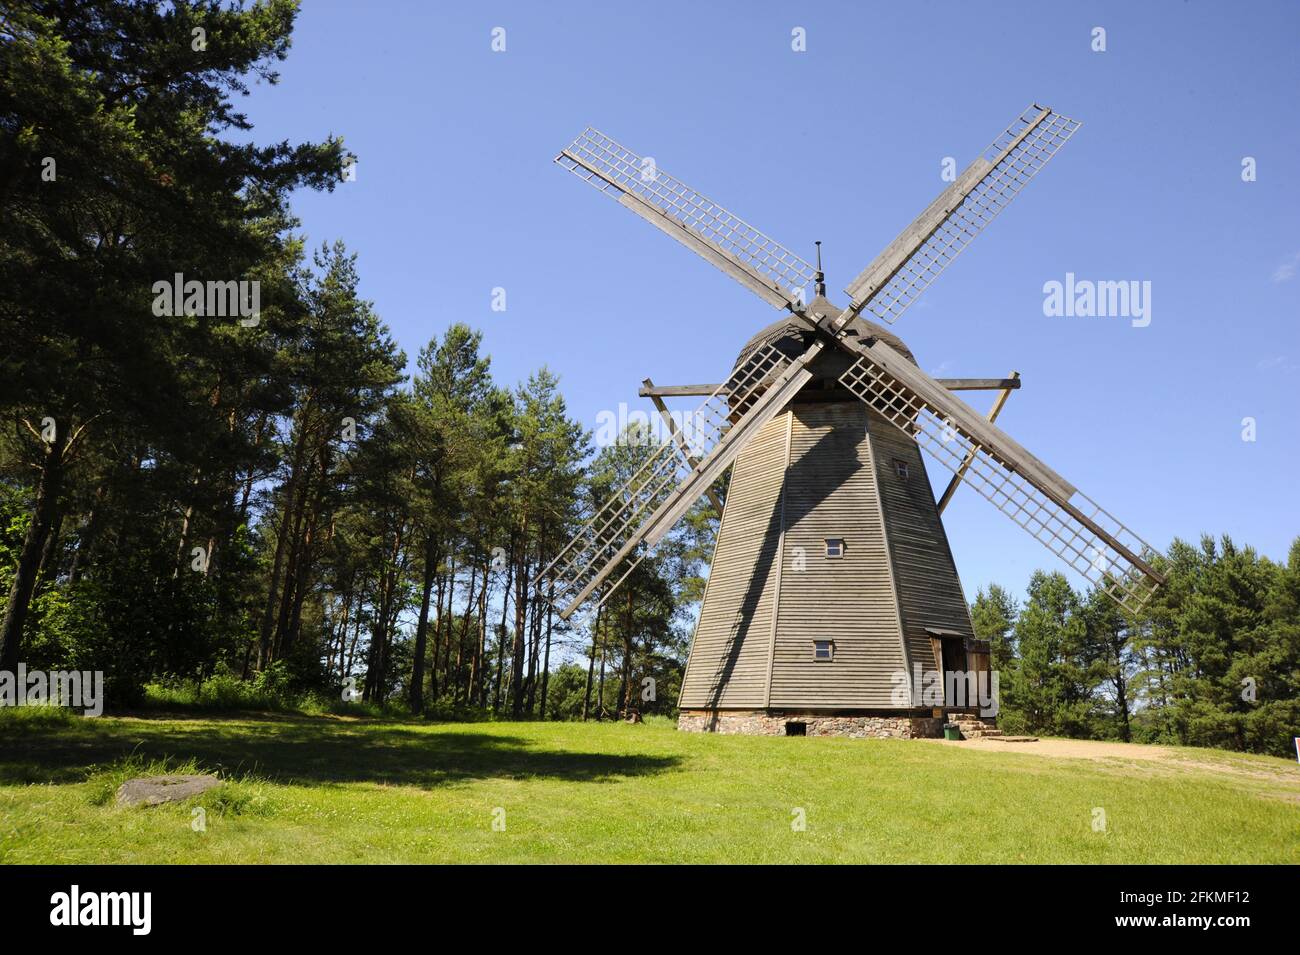 Windmill, Muzeum Budownictwa Ludowego Park Etnograficzny, open-air museum of traditional architecture, farmsteads and churches in East Prussia Stock Photo